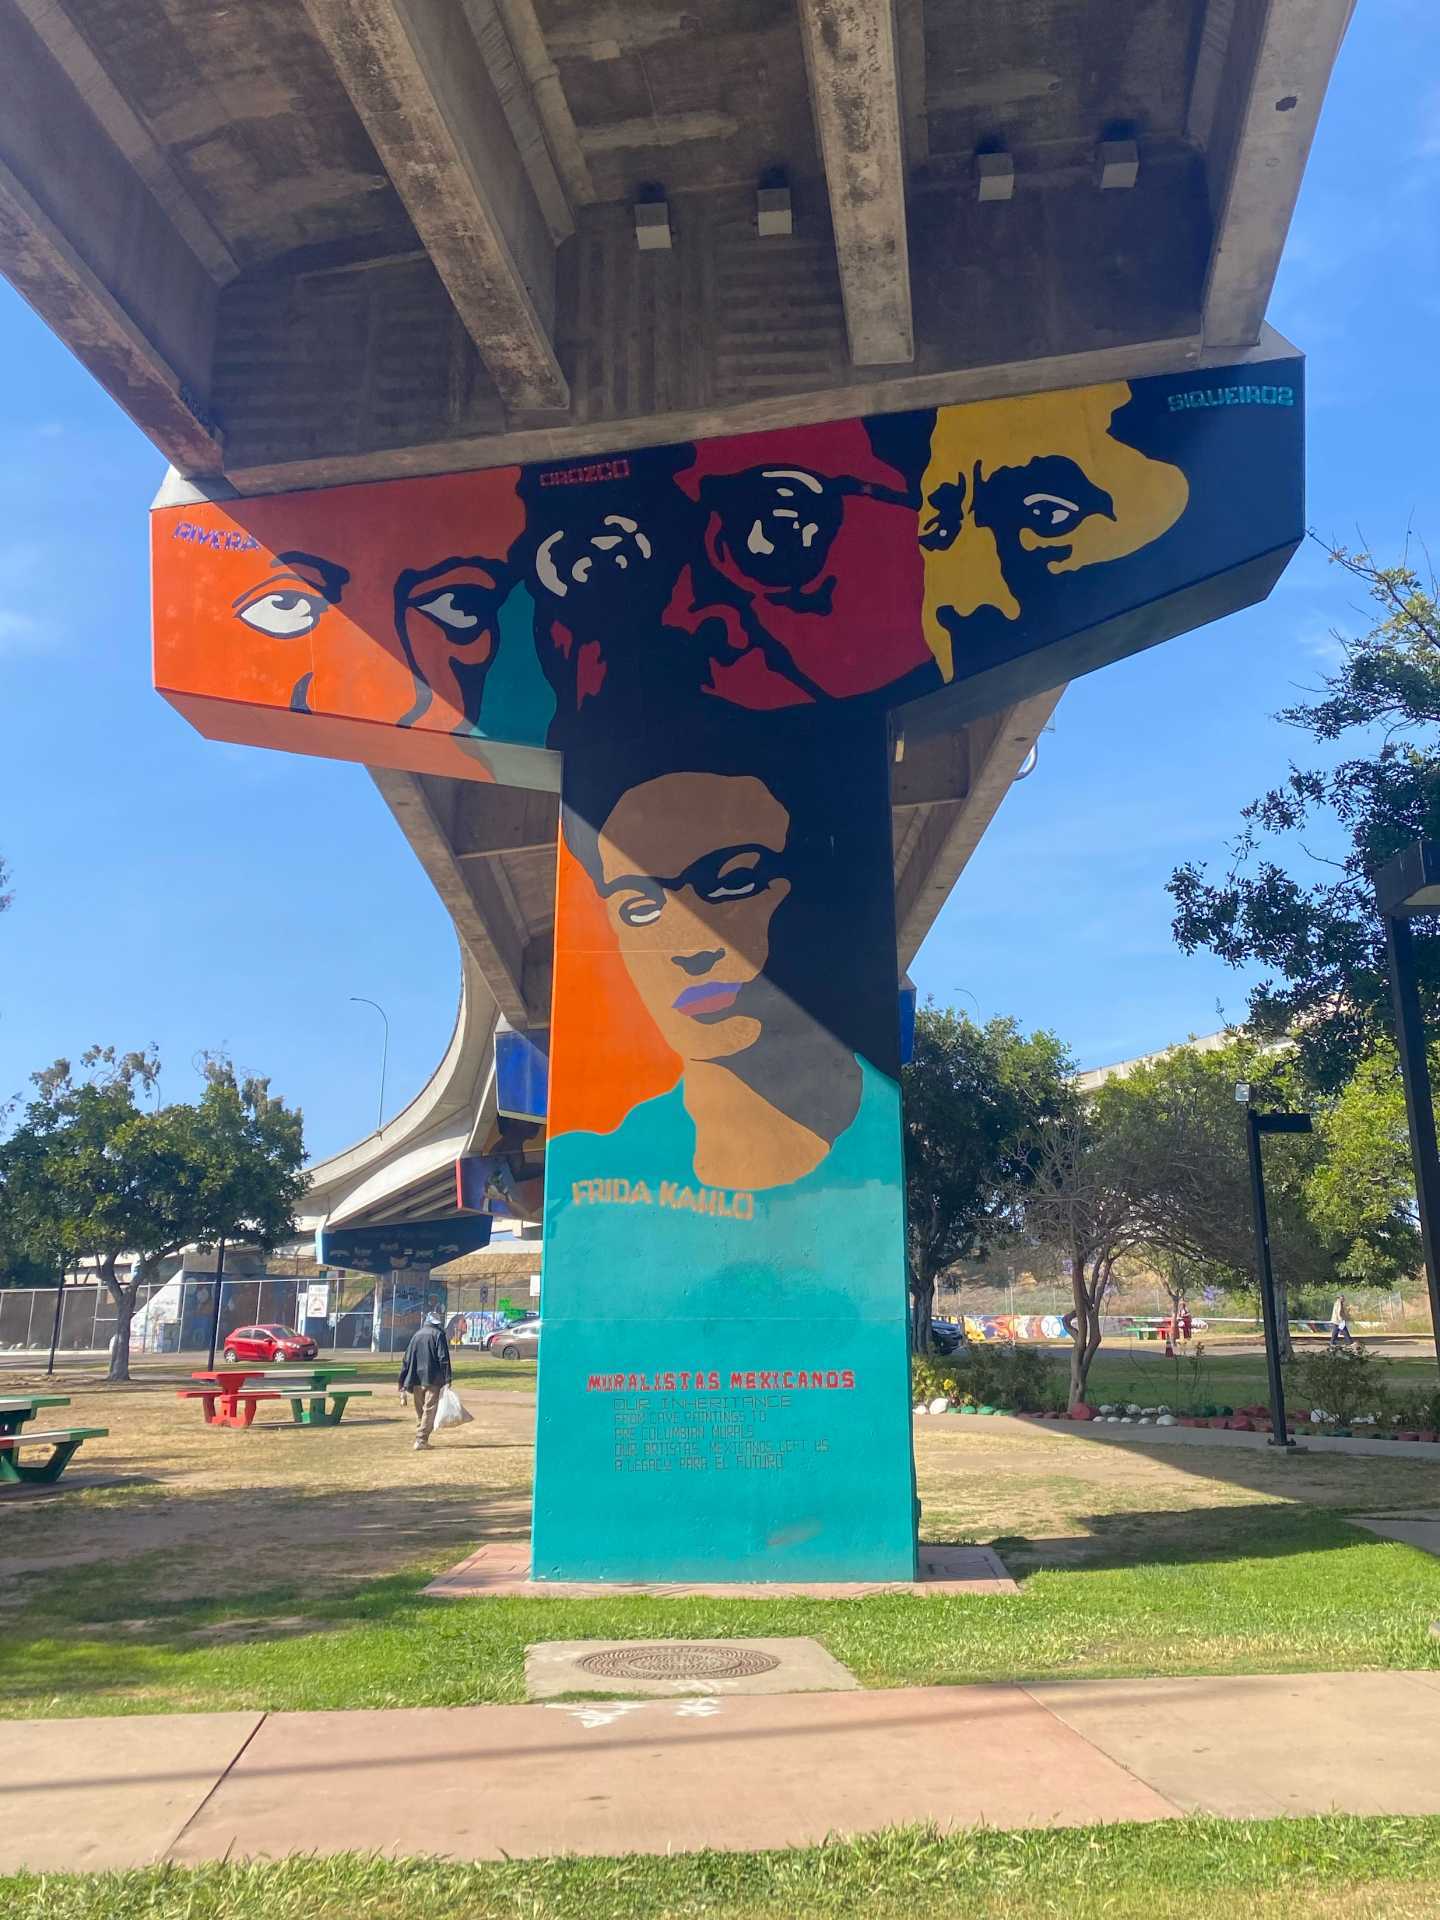 A mural of Frida Kahlo in Chicano Park, San Diego, California